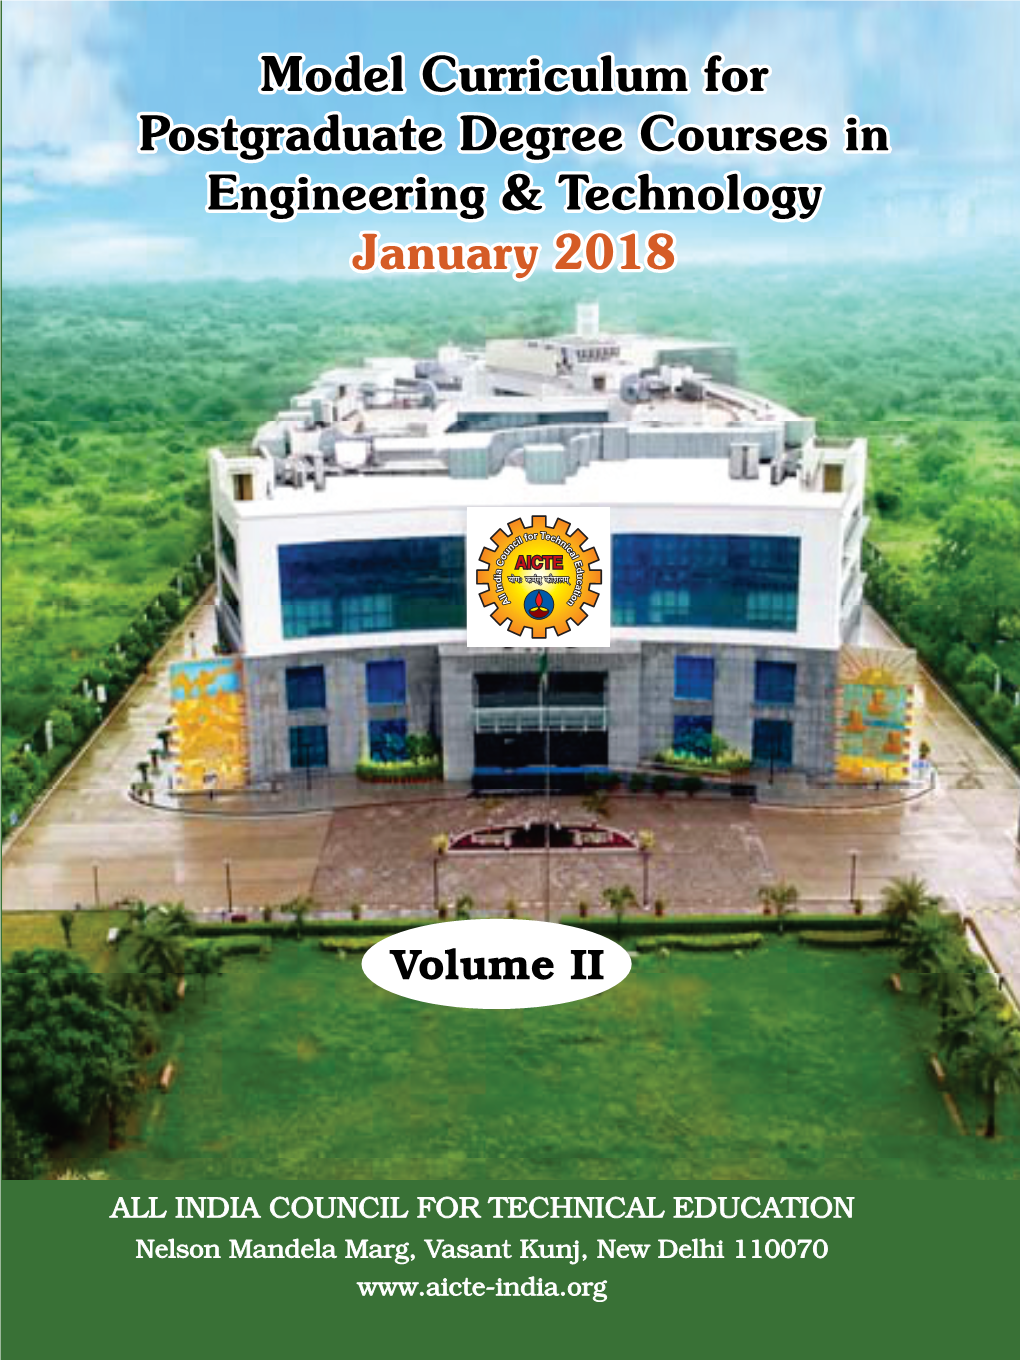 AICTE Model Curriculum for PG Degree Courses in Engineering